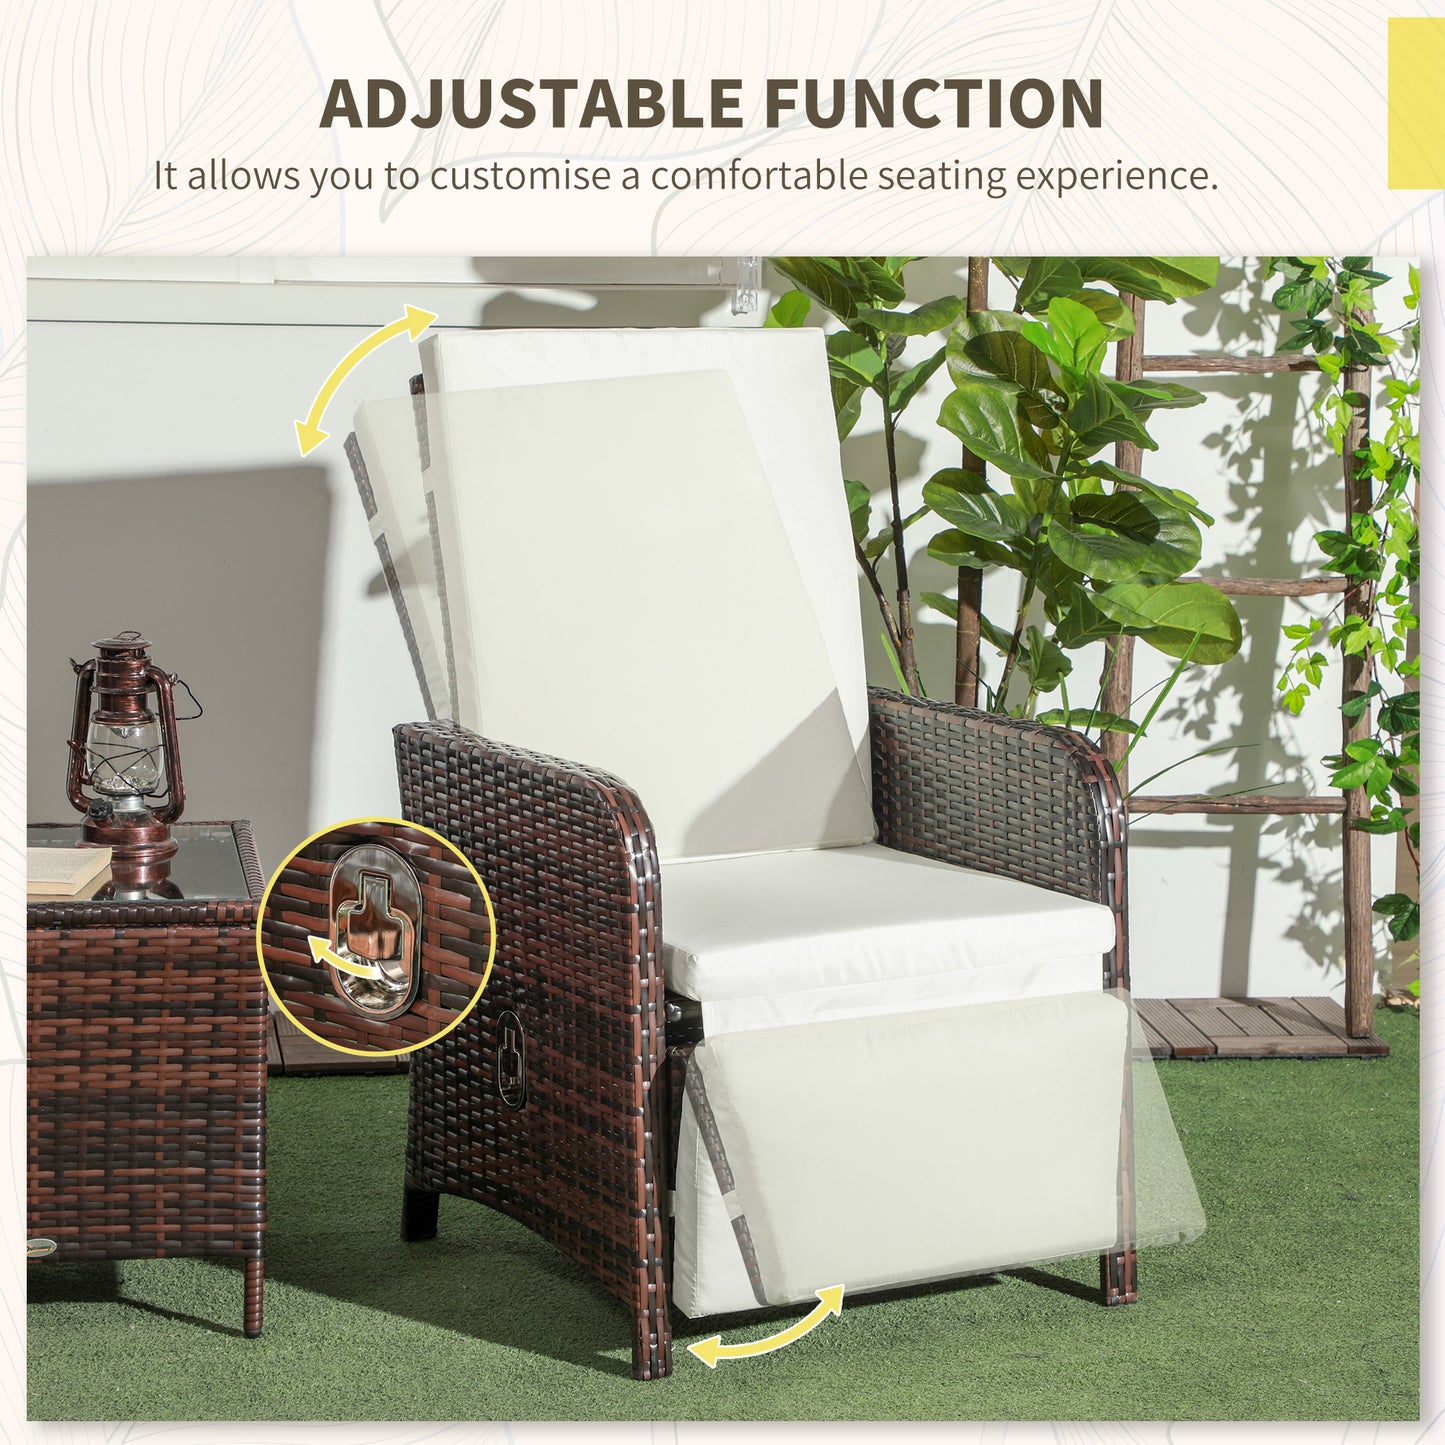 Outsunny 3 Pieces Rattan Bistro Set Balcony Furniture with Cushions, Storage Function - Mixed-Brown